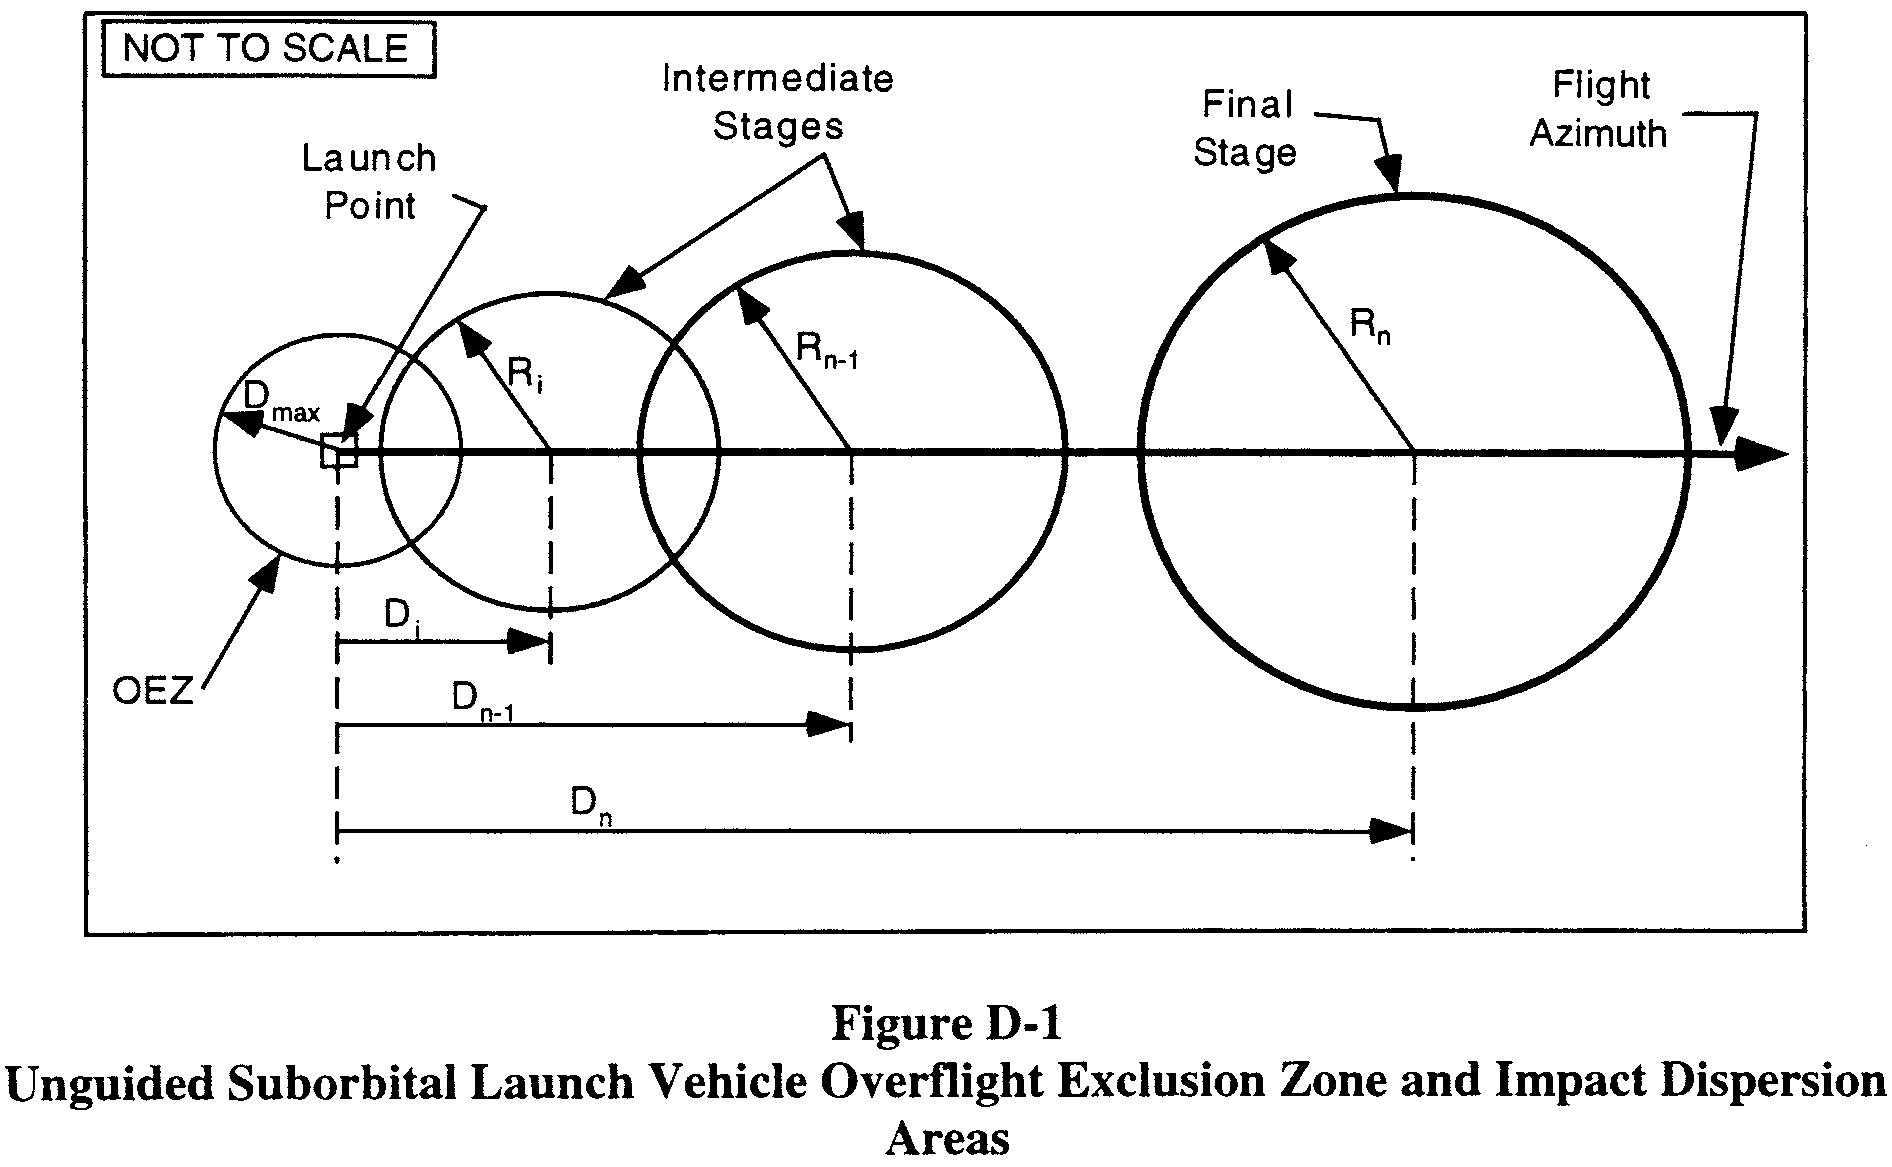 Graphic of (4) An applicant shall display an overflight exclusion zone, each intermediate and final stage impact point (Di through Dn), and each impact dispersion area for the intermediate and final launch vehicle stages on maps in accordance with paragraph (b)(2).